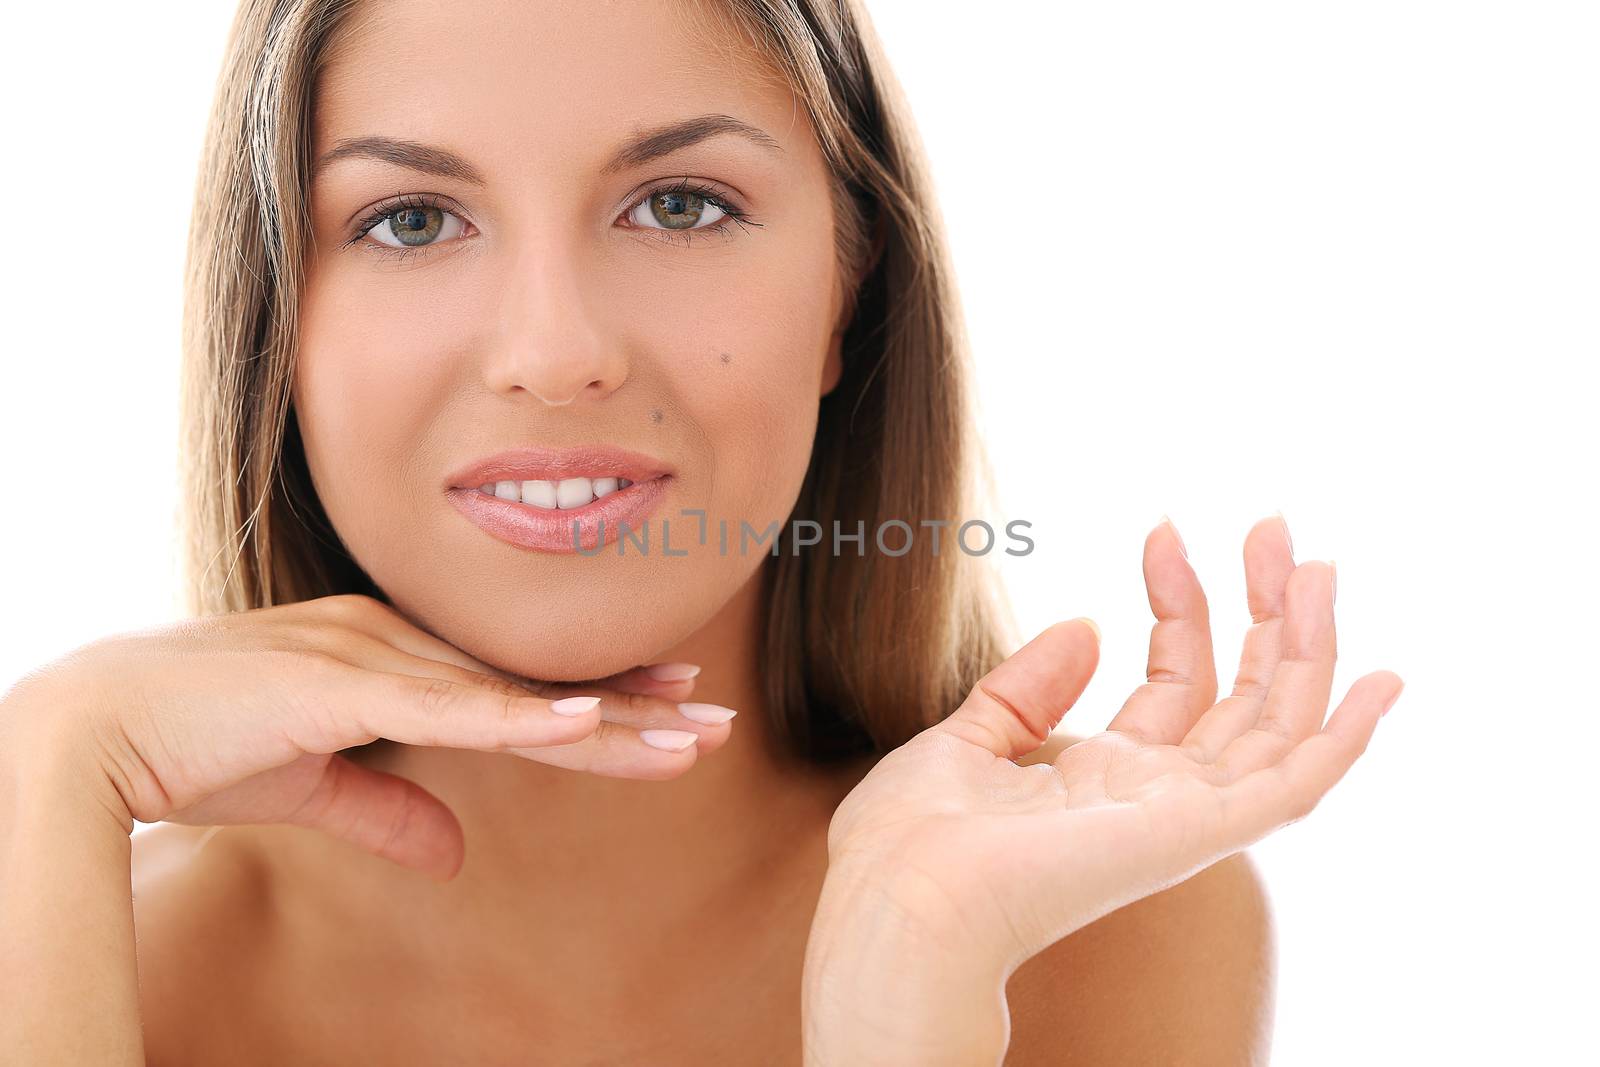 Portrait of a beautiful woman who is holding her hands hear her face